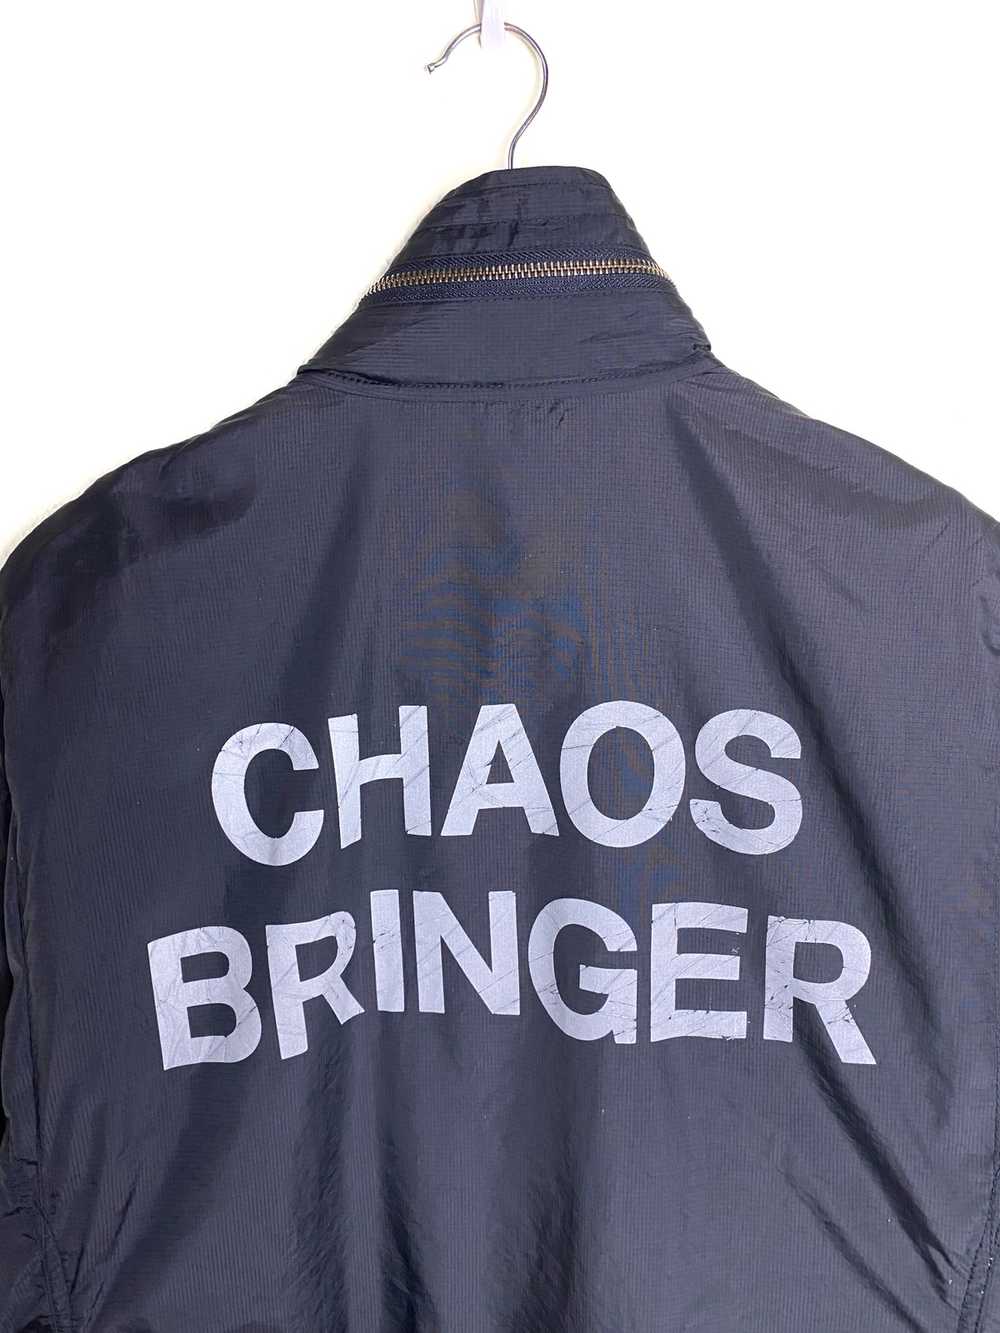 Hysteric Glamour Chaos Bringer M-65 Jacket - image 6